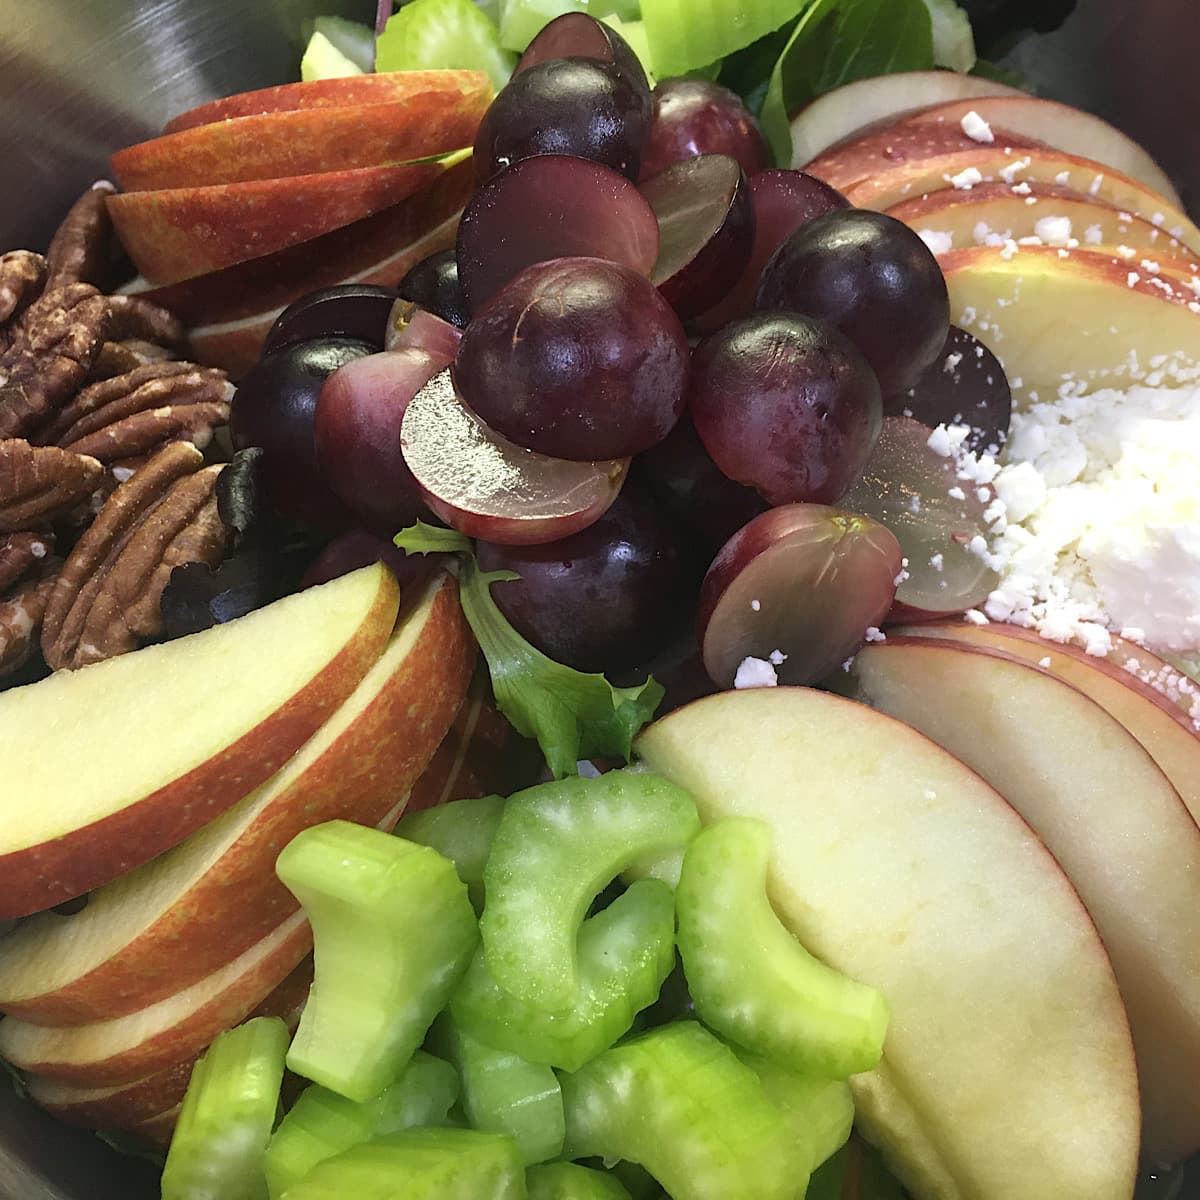 sliced apples, celery, grapes, Feta cheese and toasted pecans